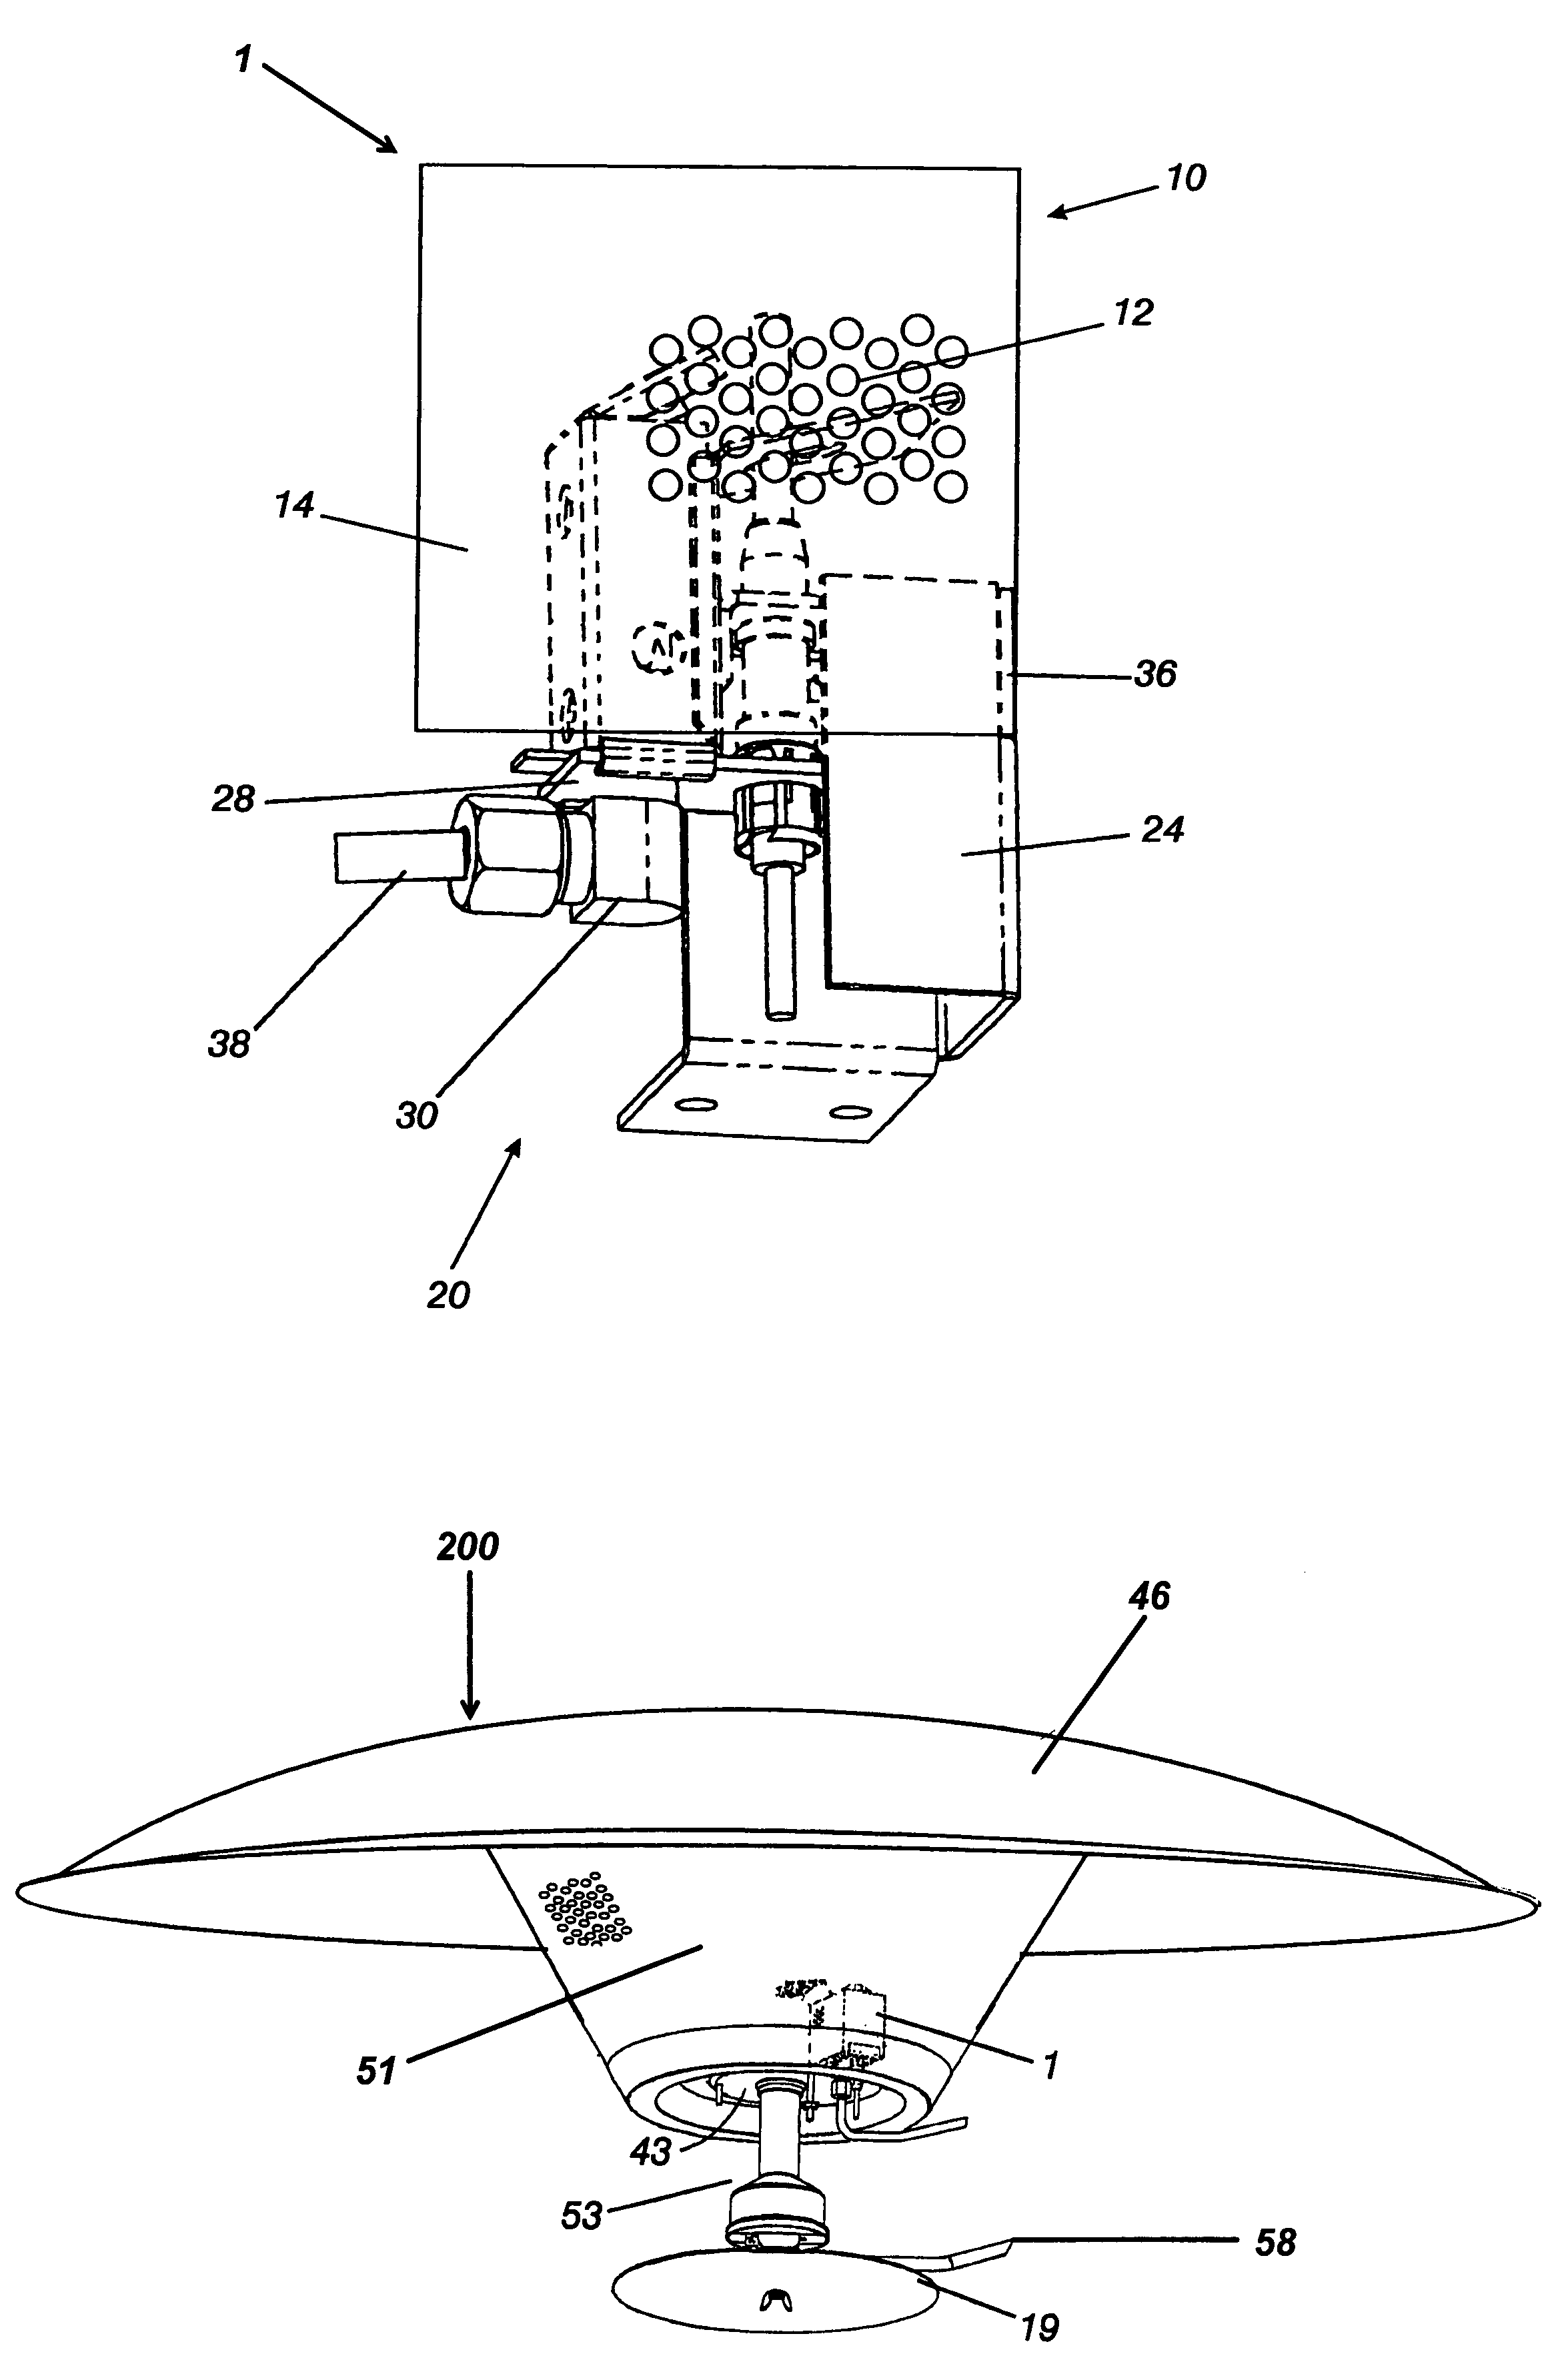 Apparatus having improved wind resistance that is a synergistic combination of a windshield and a brooder heater pilot assembly